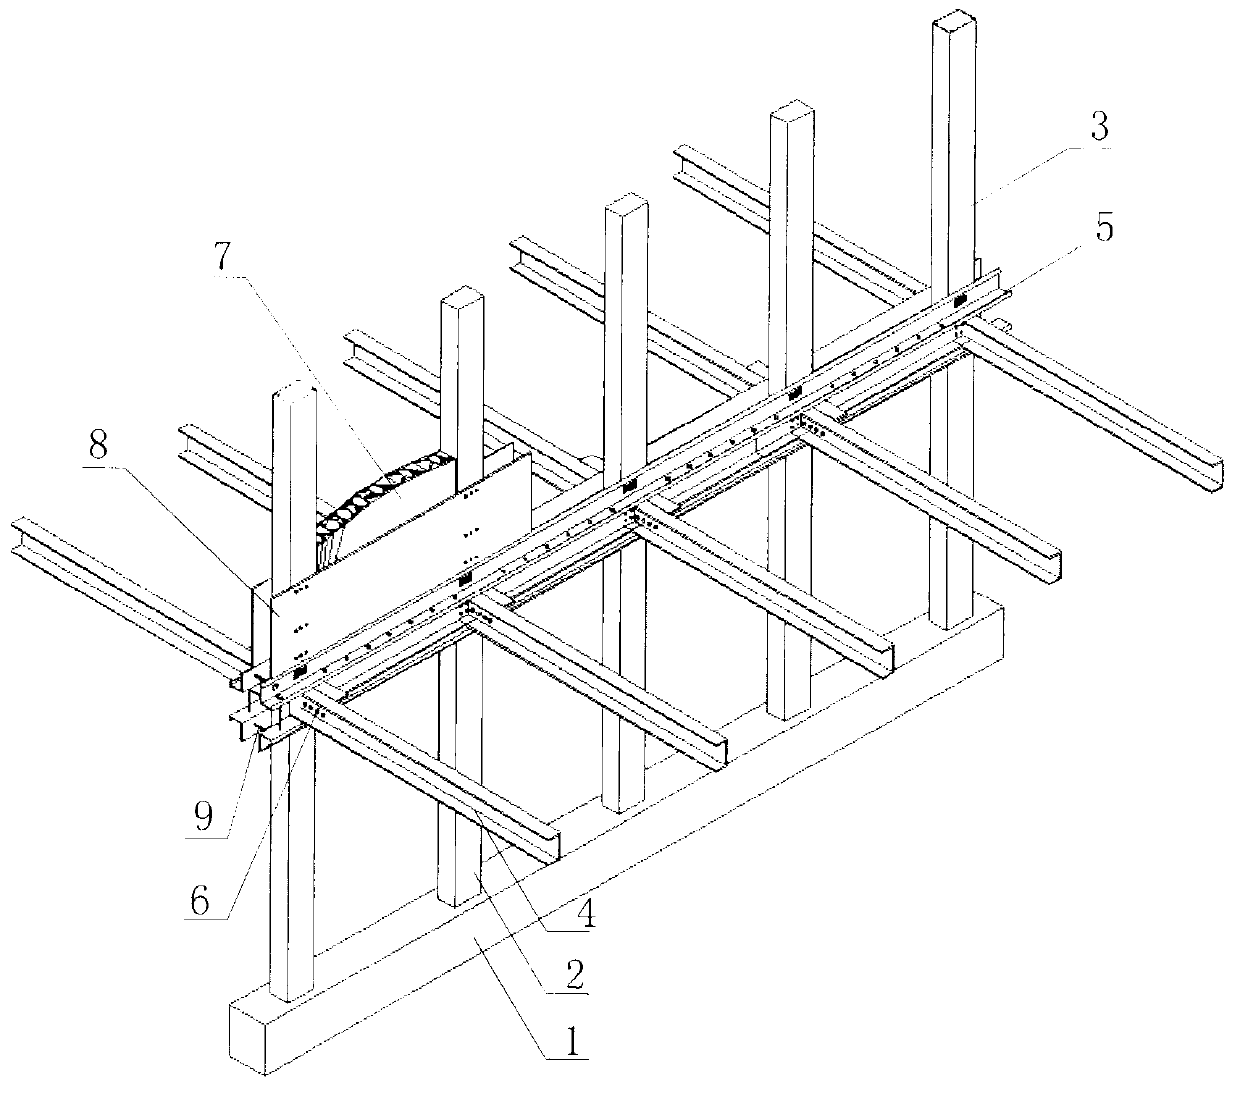 Cold-formed thin-walled steel column and beam structural system for multistoried building